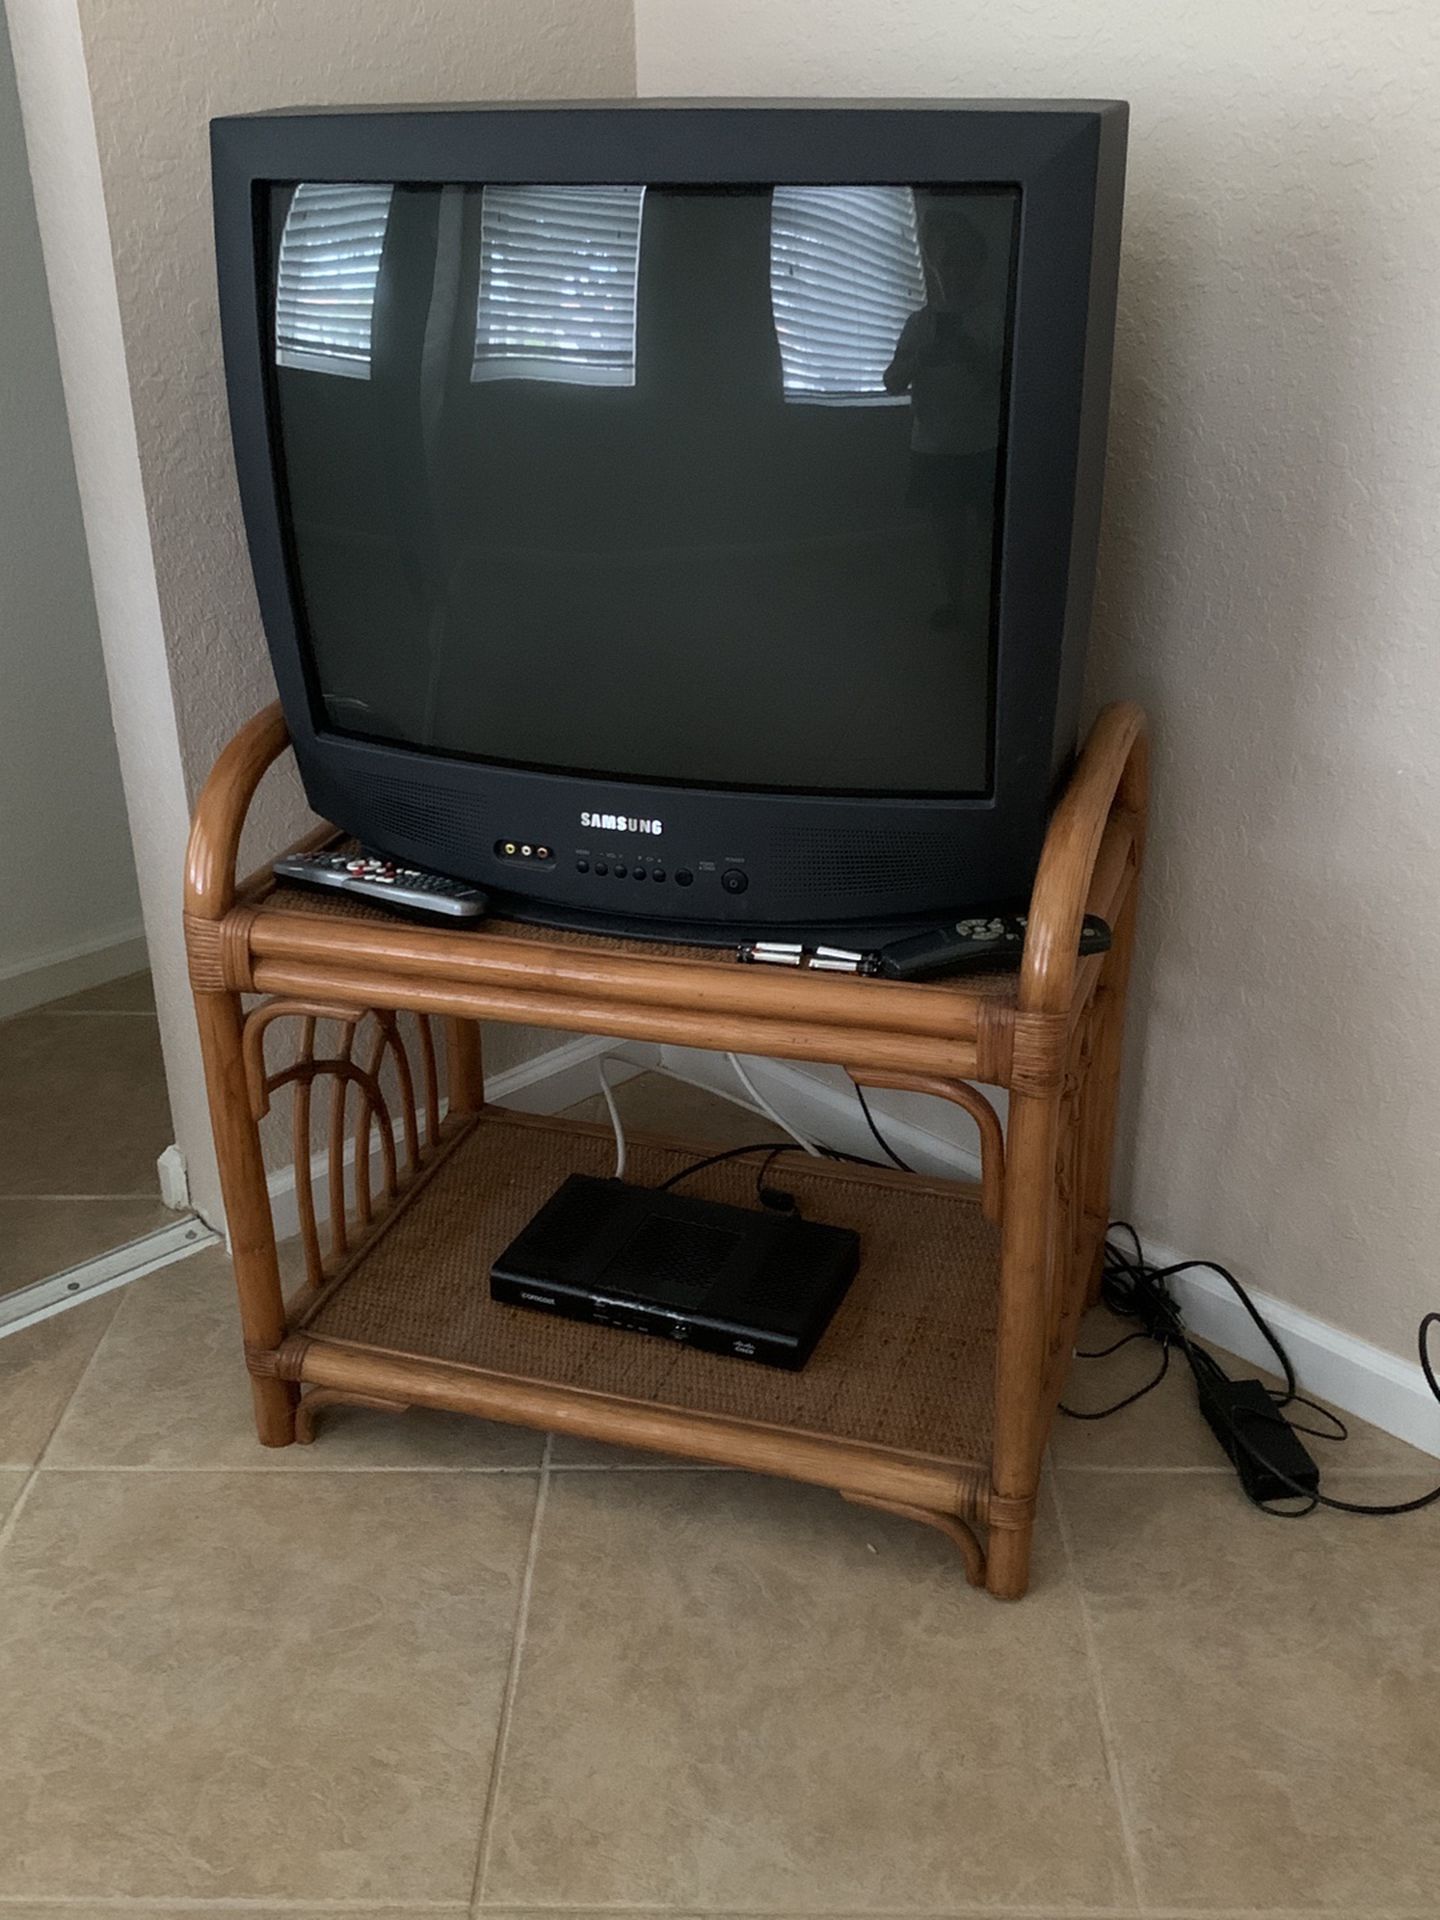 Working older TV and/or TV stand